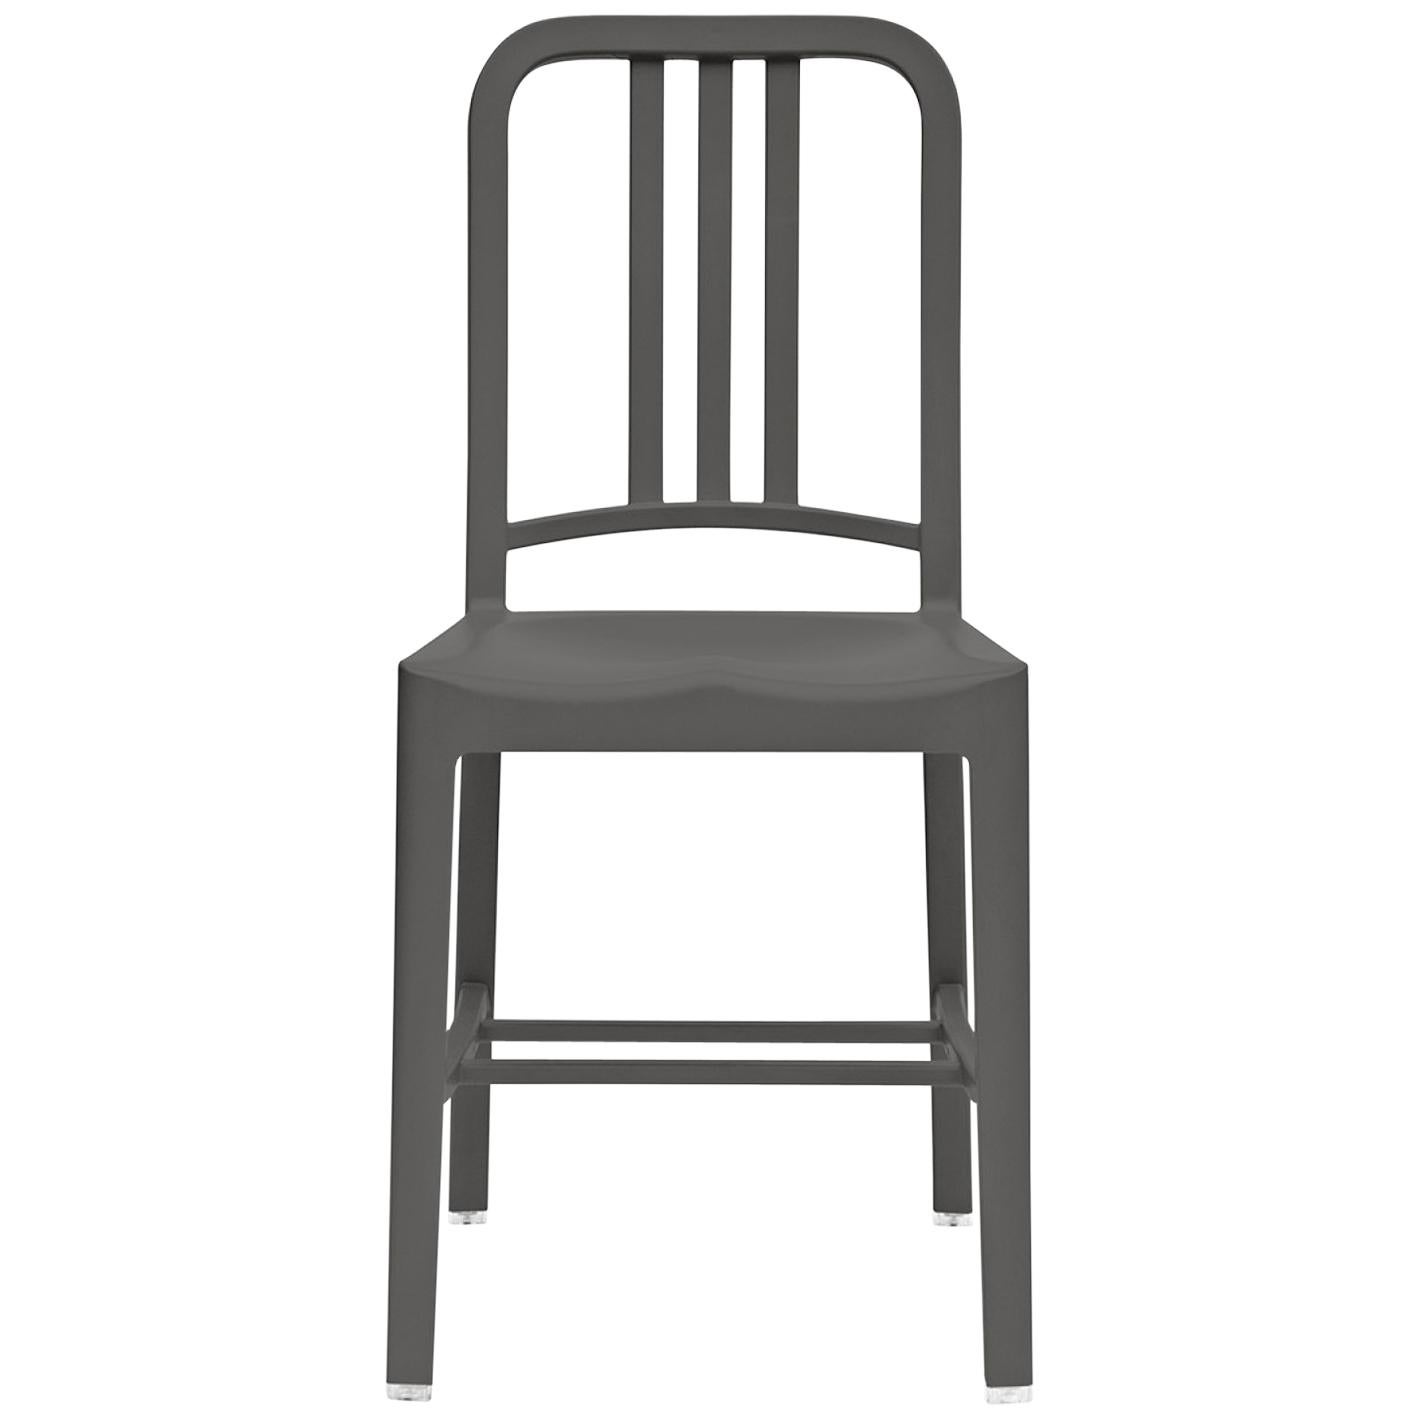 Emeco 111 Navy Chair in Charcoal by Coca-Cola